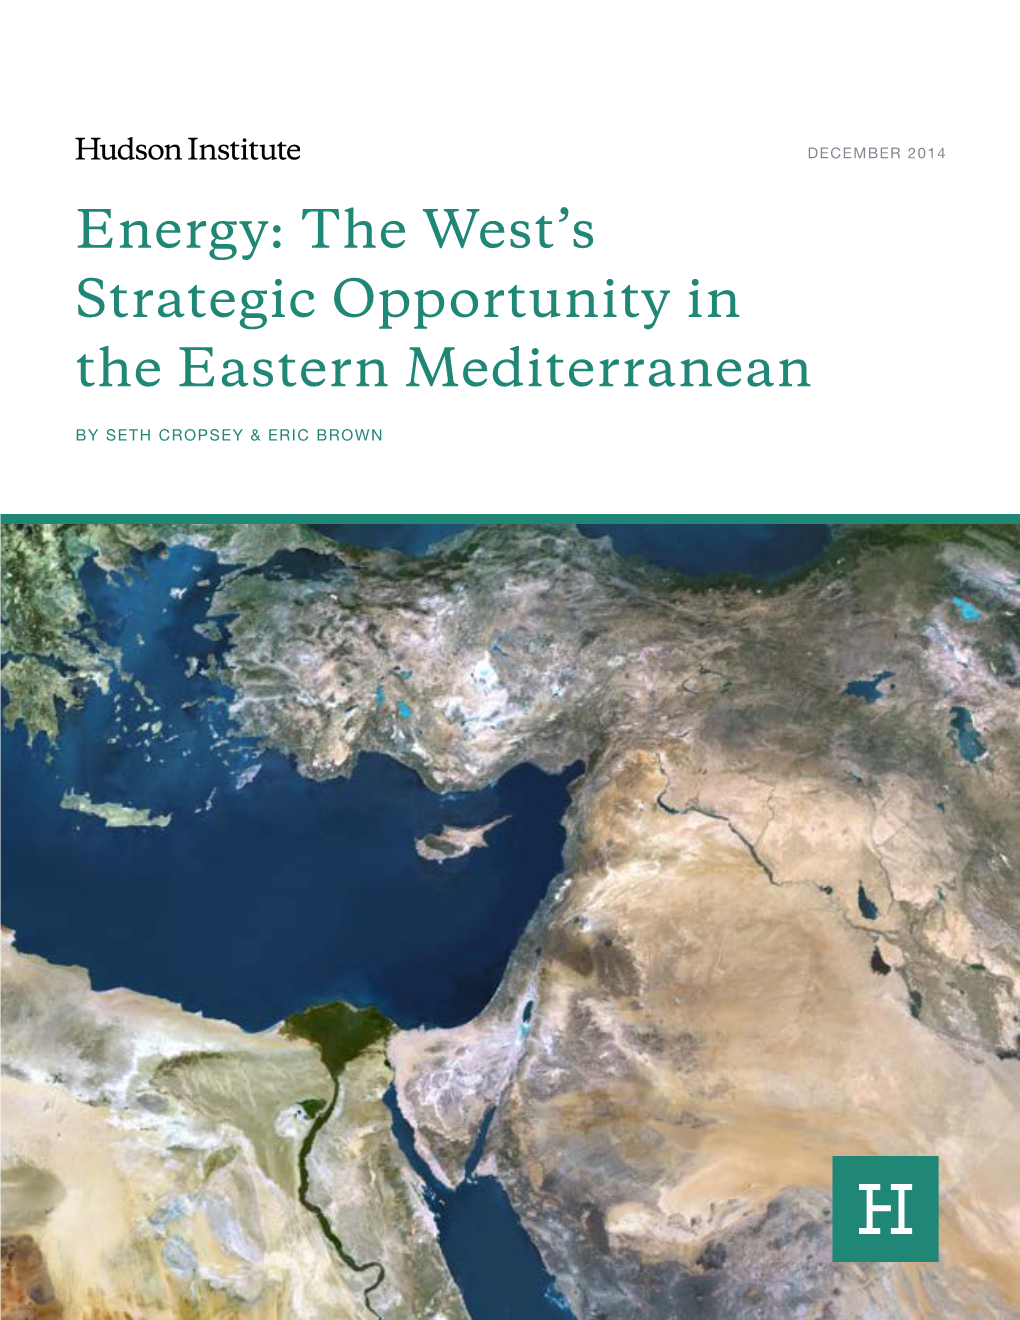 The West's Strategic Opportunity in the Eastern Mediterranean